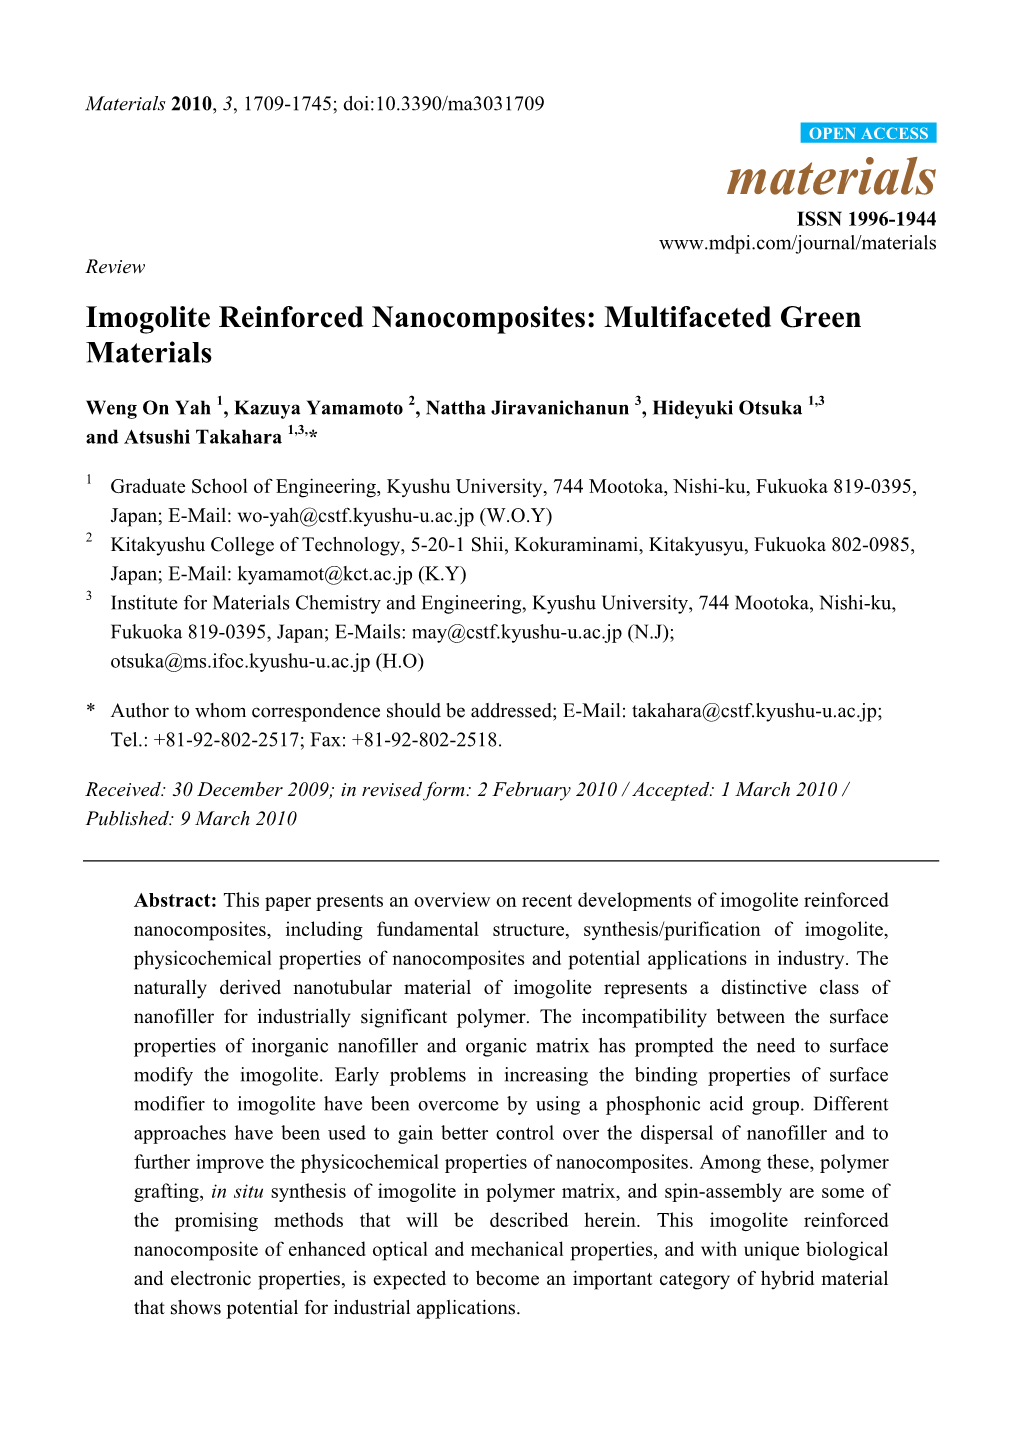 Imogolite Reinforced Nanocomposites: Multifaceted Green Materials